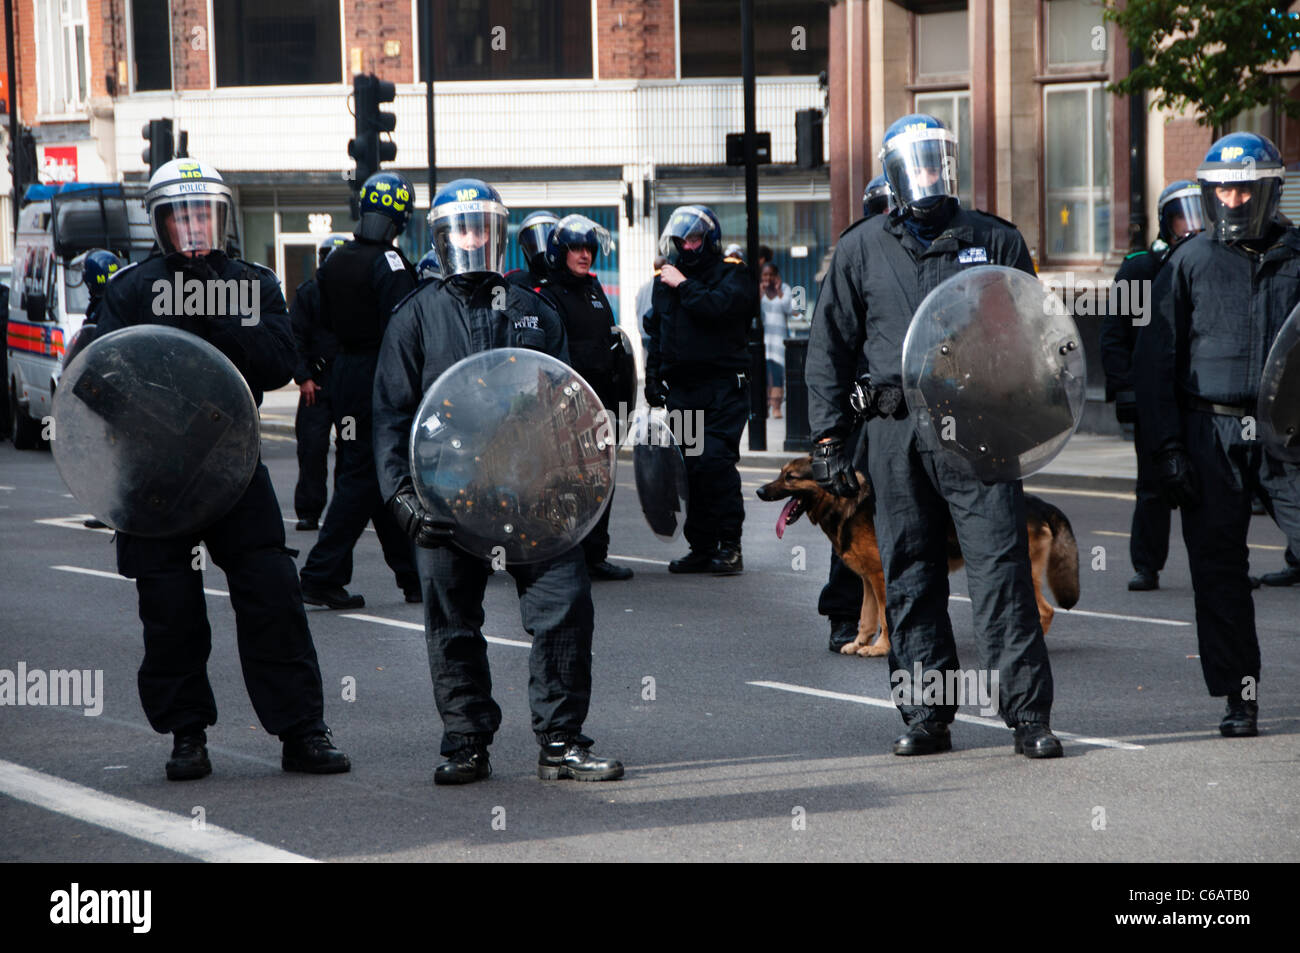 Riot police  with helmets and riot shields and an Alsatian dog on Mare street Hackney during the August 8th 2011 riot Stock Photo